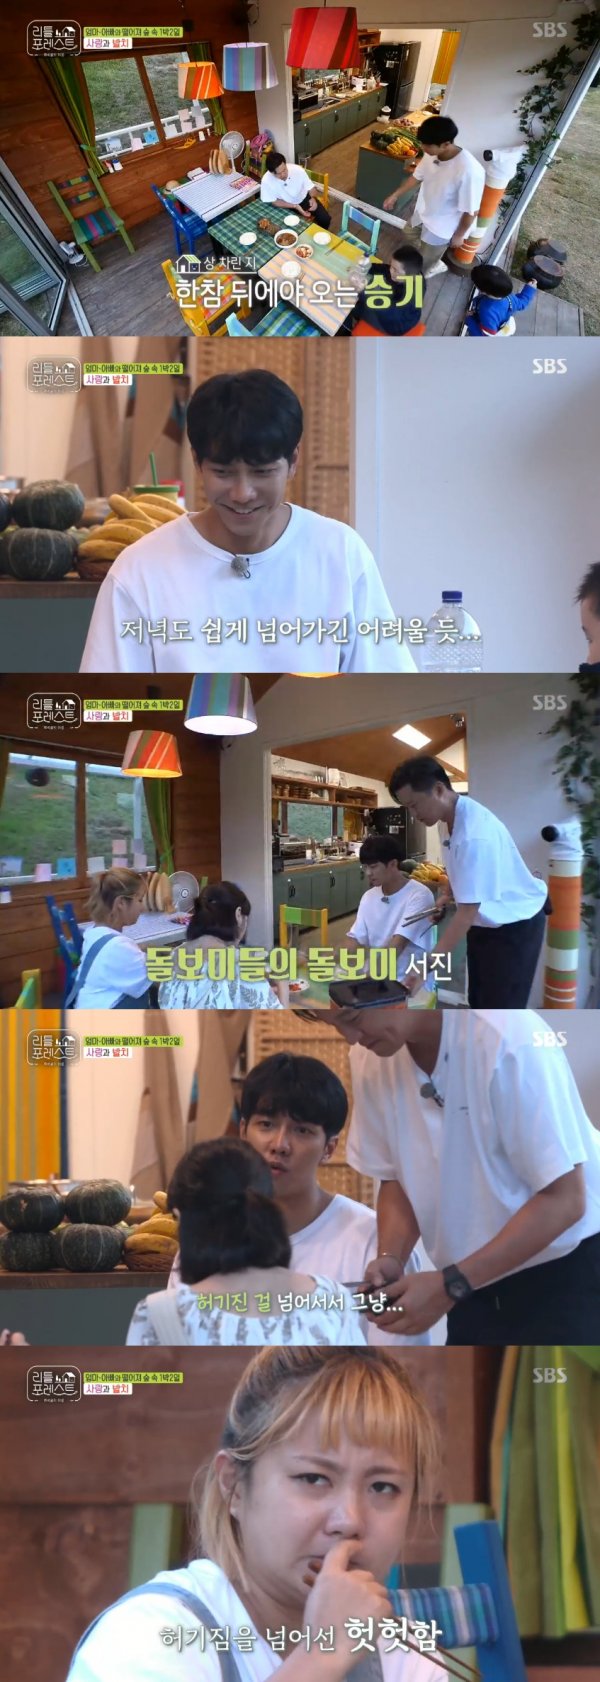 Little Forest Lee Seung-gi, Park Na-rae and Jung So-min did not let up even as they ate dinner.In the SBS entertainment program Little Forest, which was broadcast on the afternoon of the 19th, dinner scenes of Lee Seo-jin, Lee Seung-gi, Jung So-min and Park Na-rae were drawn.Lee Seung-gi, Jung So-min and Park Na-rae went to dinner after the childrens meal time.But the children were playing and playing, and they could not keep their eyes on the food.Lee Seung-gi ate rice and Lee Seo-jin said, You were hungry a lot, and Lee Seung-gi said, I went beyond hunger.The next step, he said.Park Na-rae also said, Its just hard, and Jung So-min continued to look at the children while eating rice.